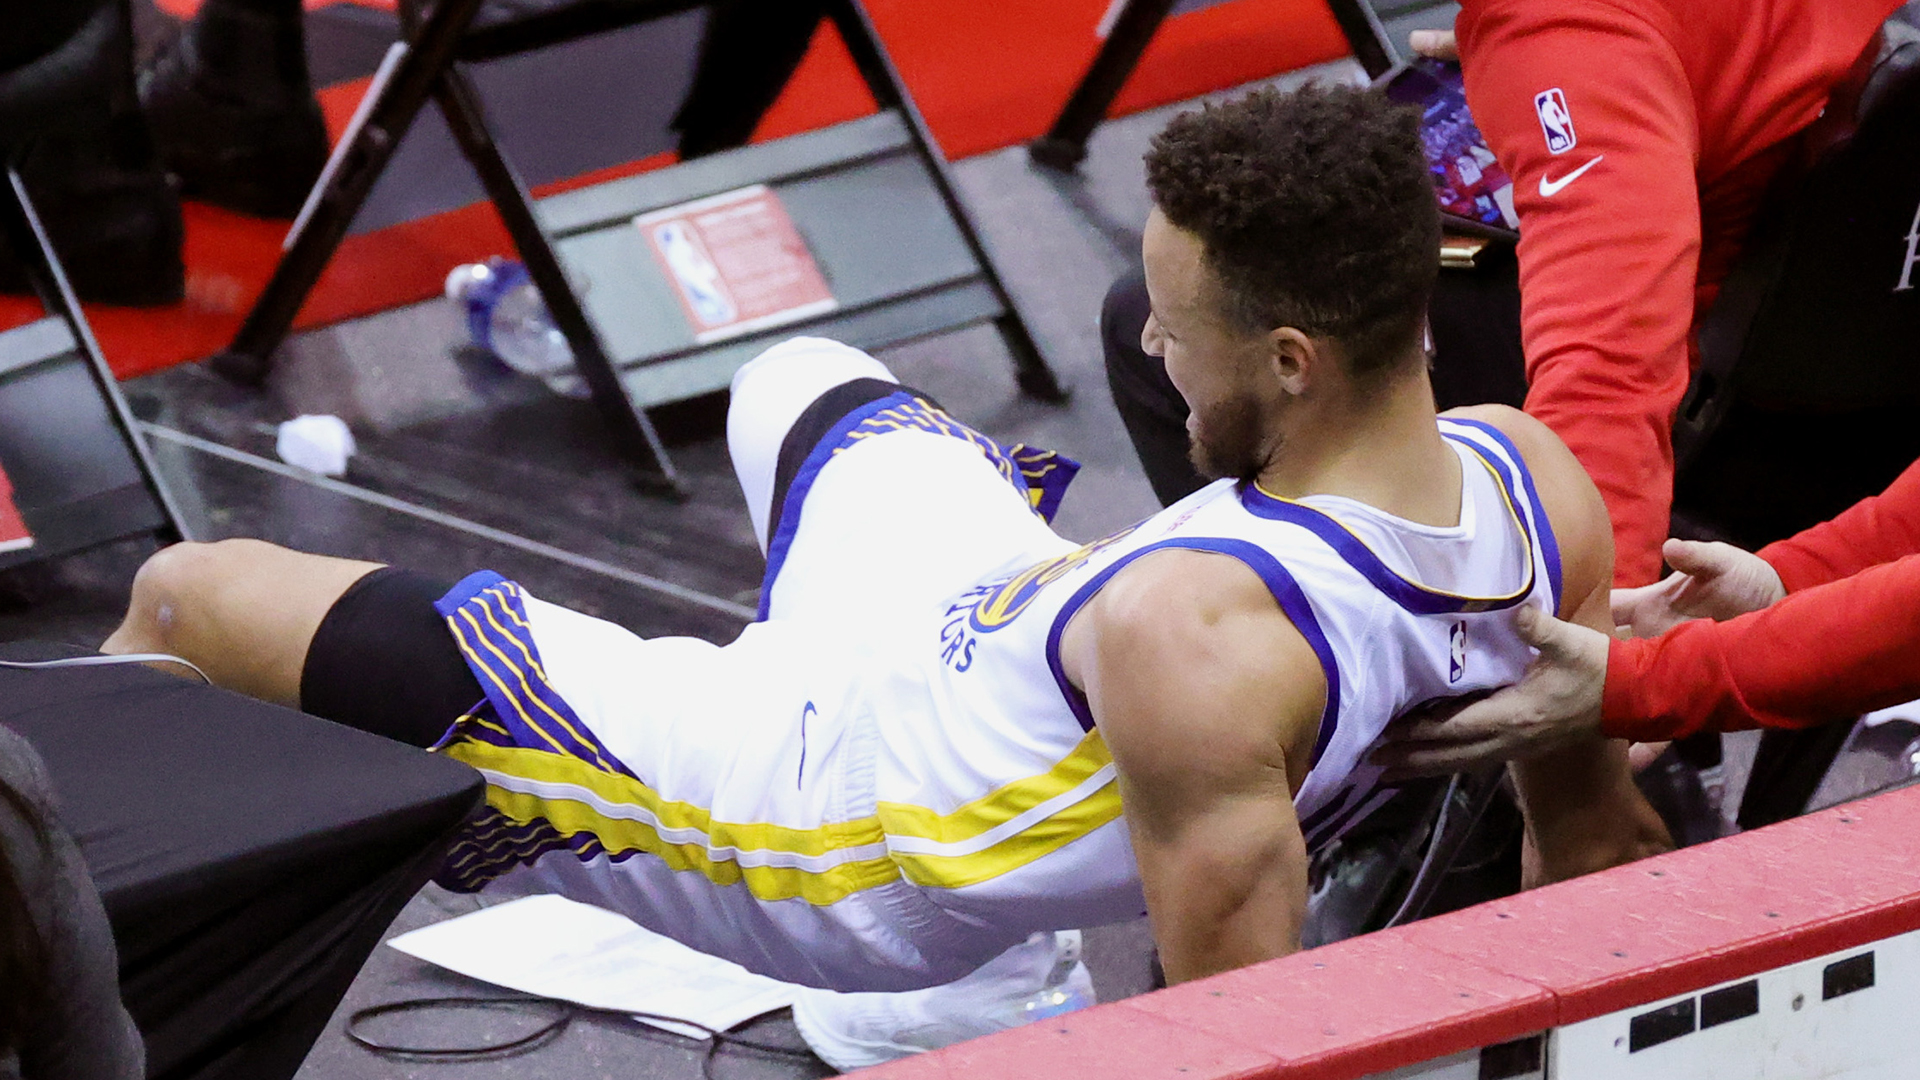 Minor Injuries That Actually Hurt - steph curry tailbone